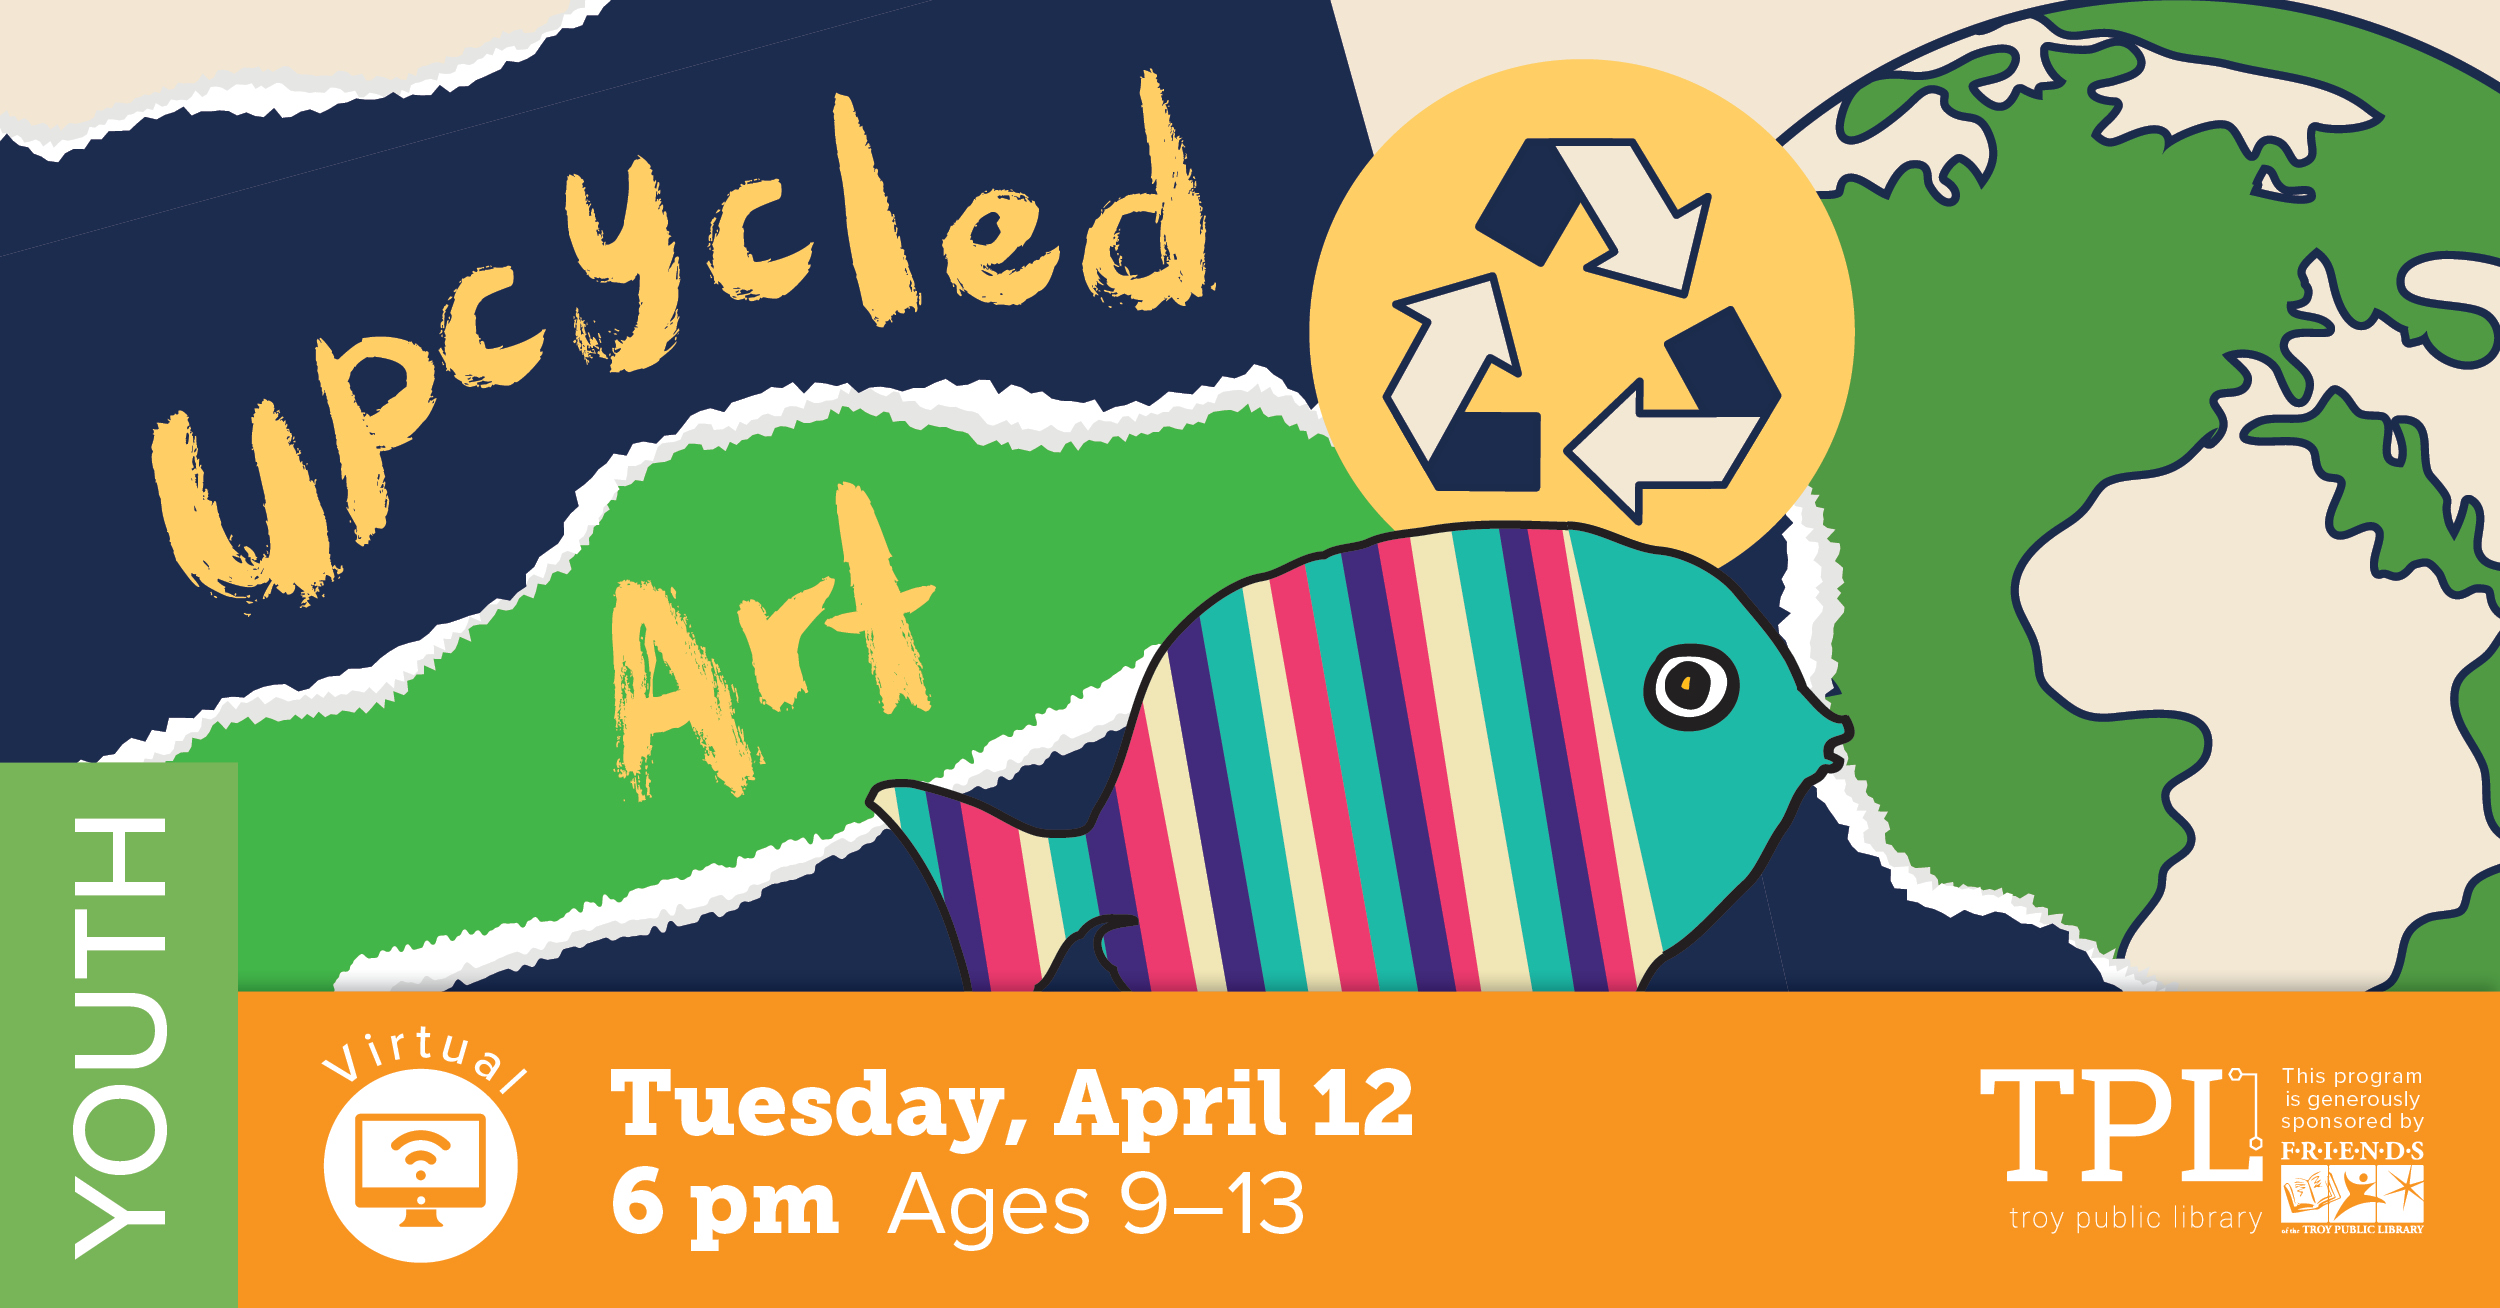 Upcycled Art. Virtual program on Tuesday, April 12th at 6 pm for ages 9 to 13. Sponsored by the Friends of the Troy Public Library.